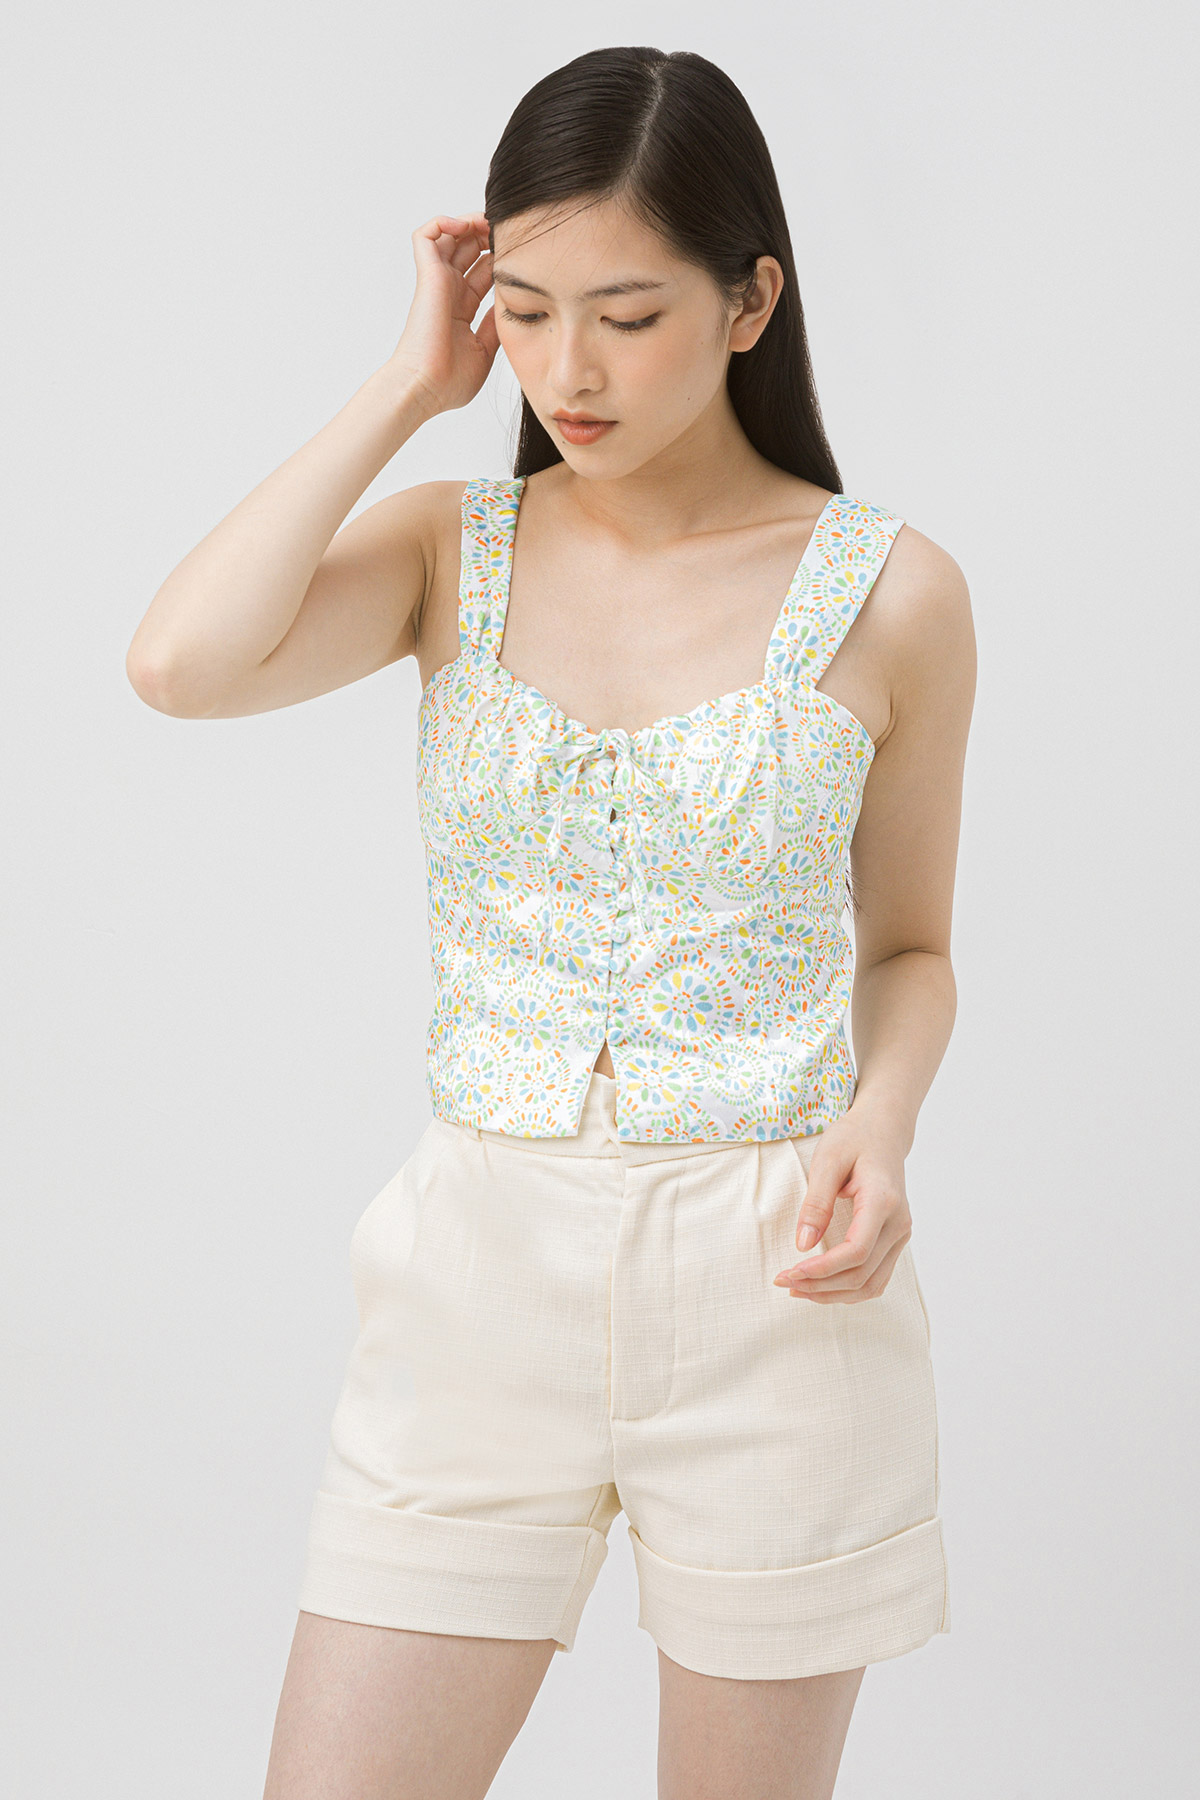 CHOQUET PADDED TOP - RAY OF SUNSHINE [BY MODPARADE]